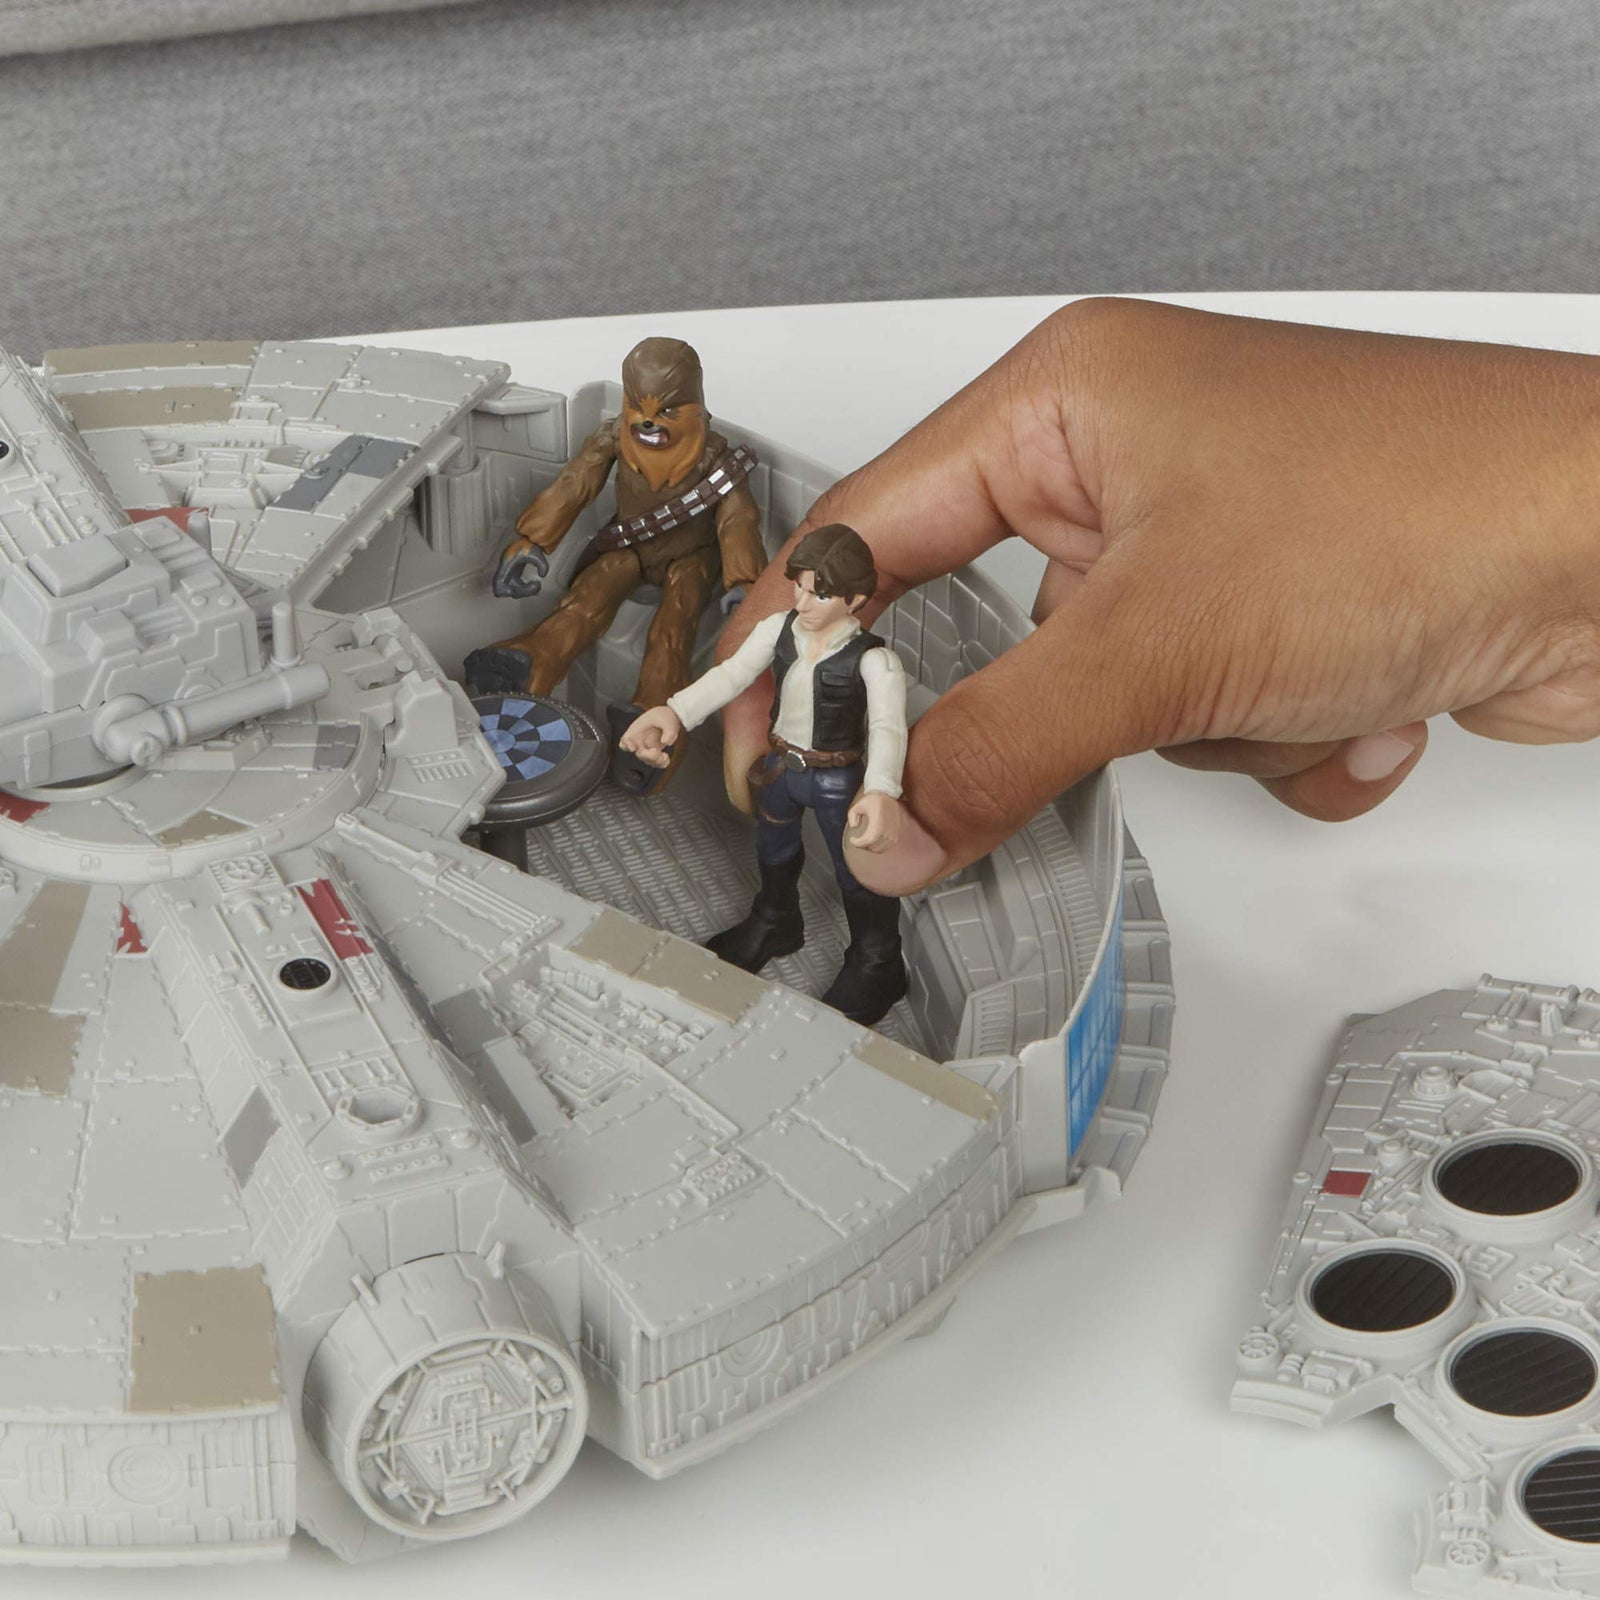 Star Wars Mission Fleet Han Solo Millennium Falcon 2.5-Inch-Scale Figure and Vehicle, Toys for Kids Ages 4 and Up